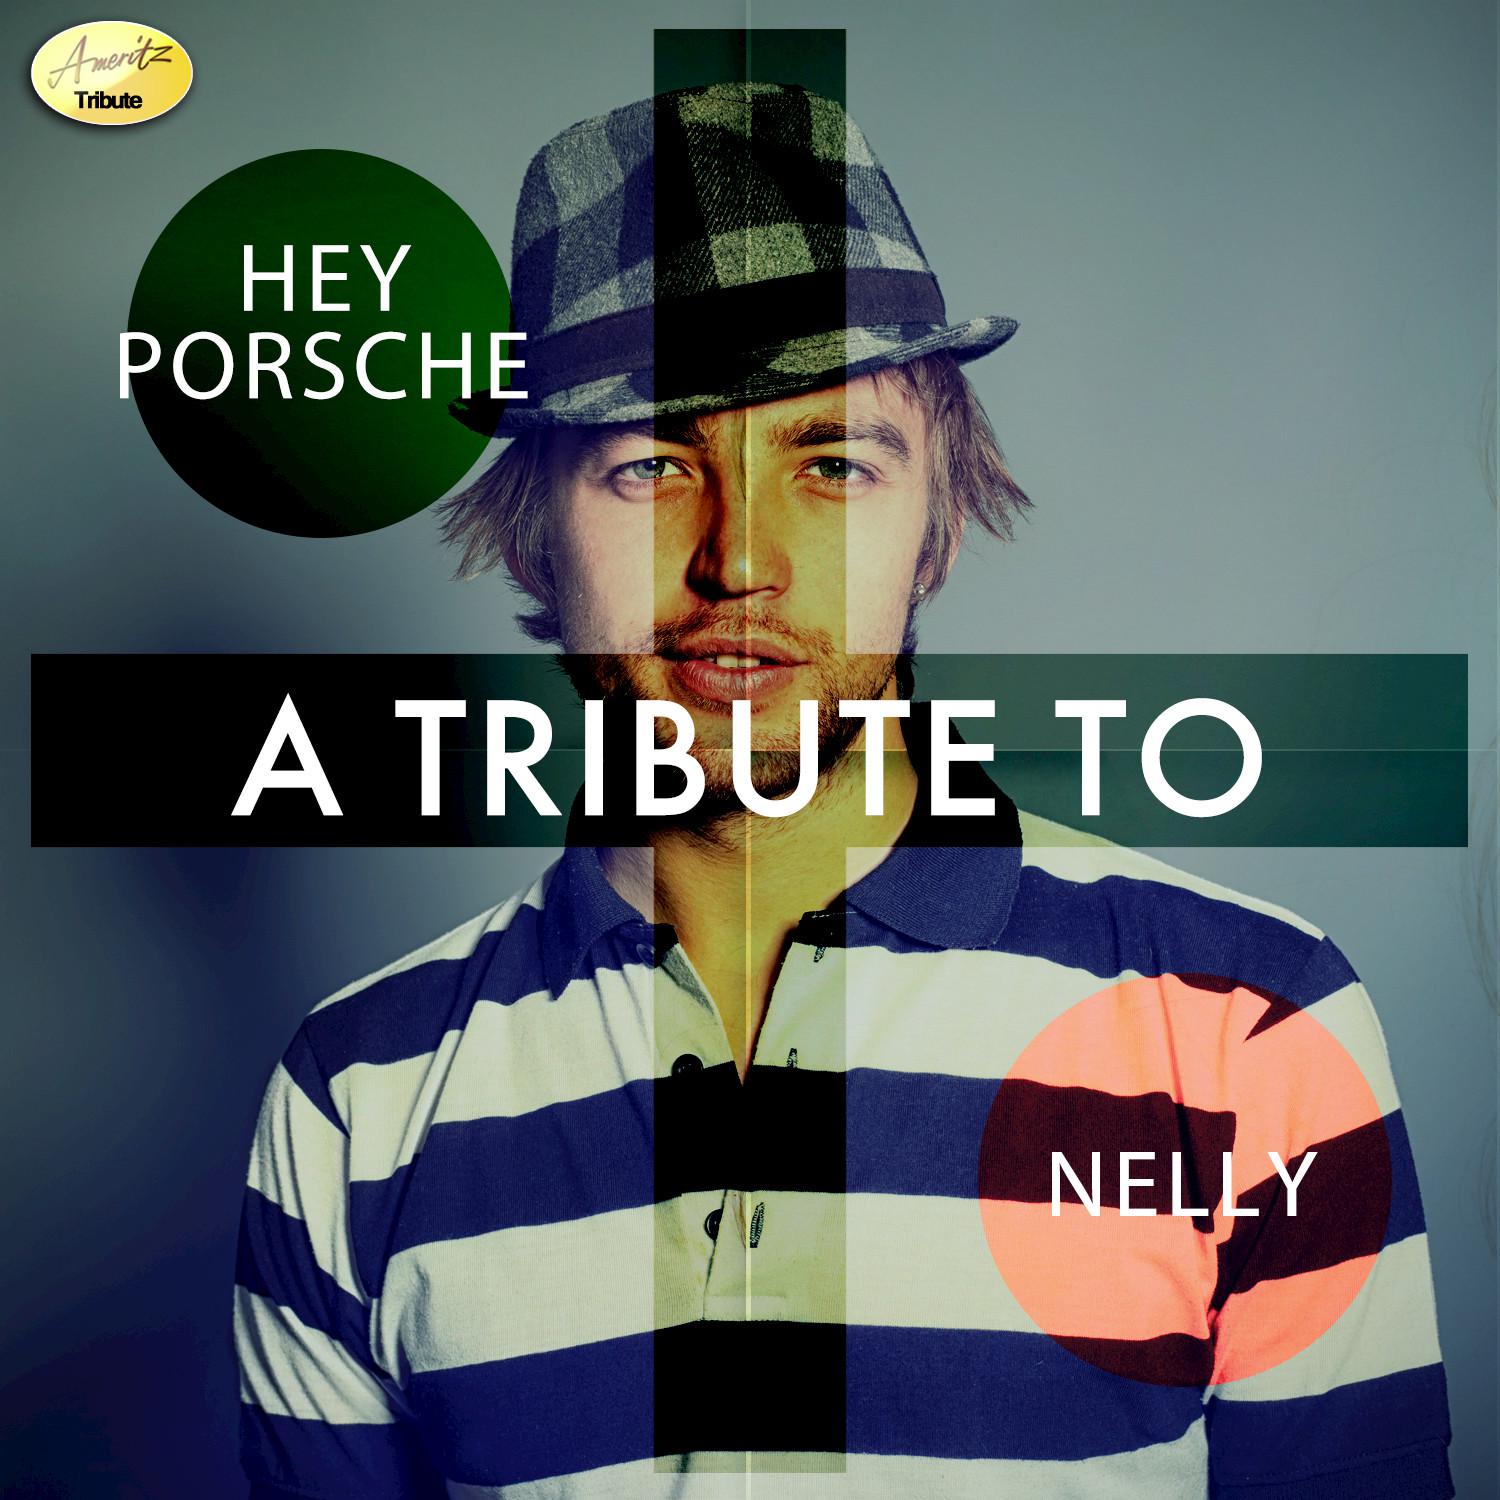 Hey Porsche- A Tribute to Nelly